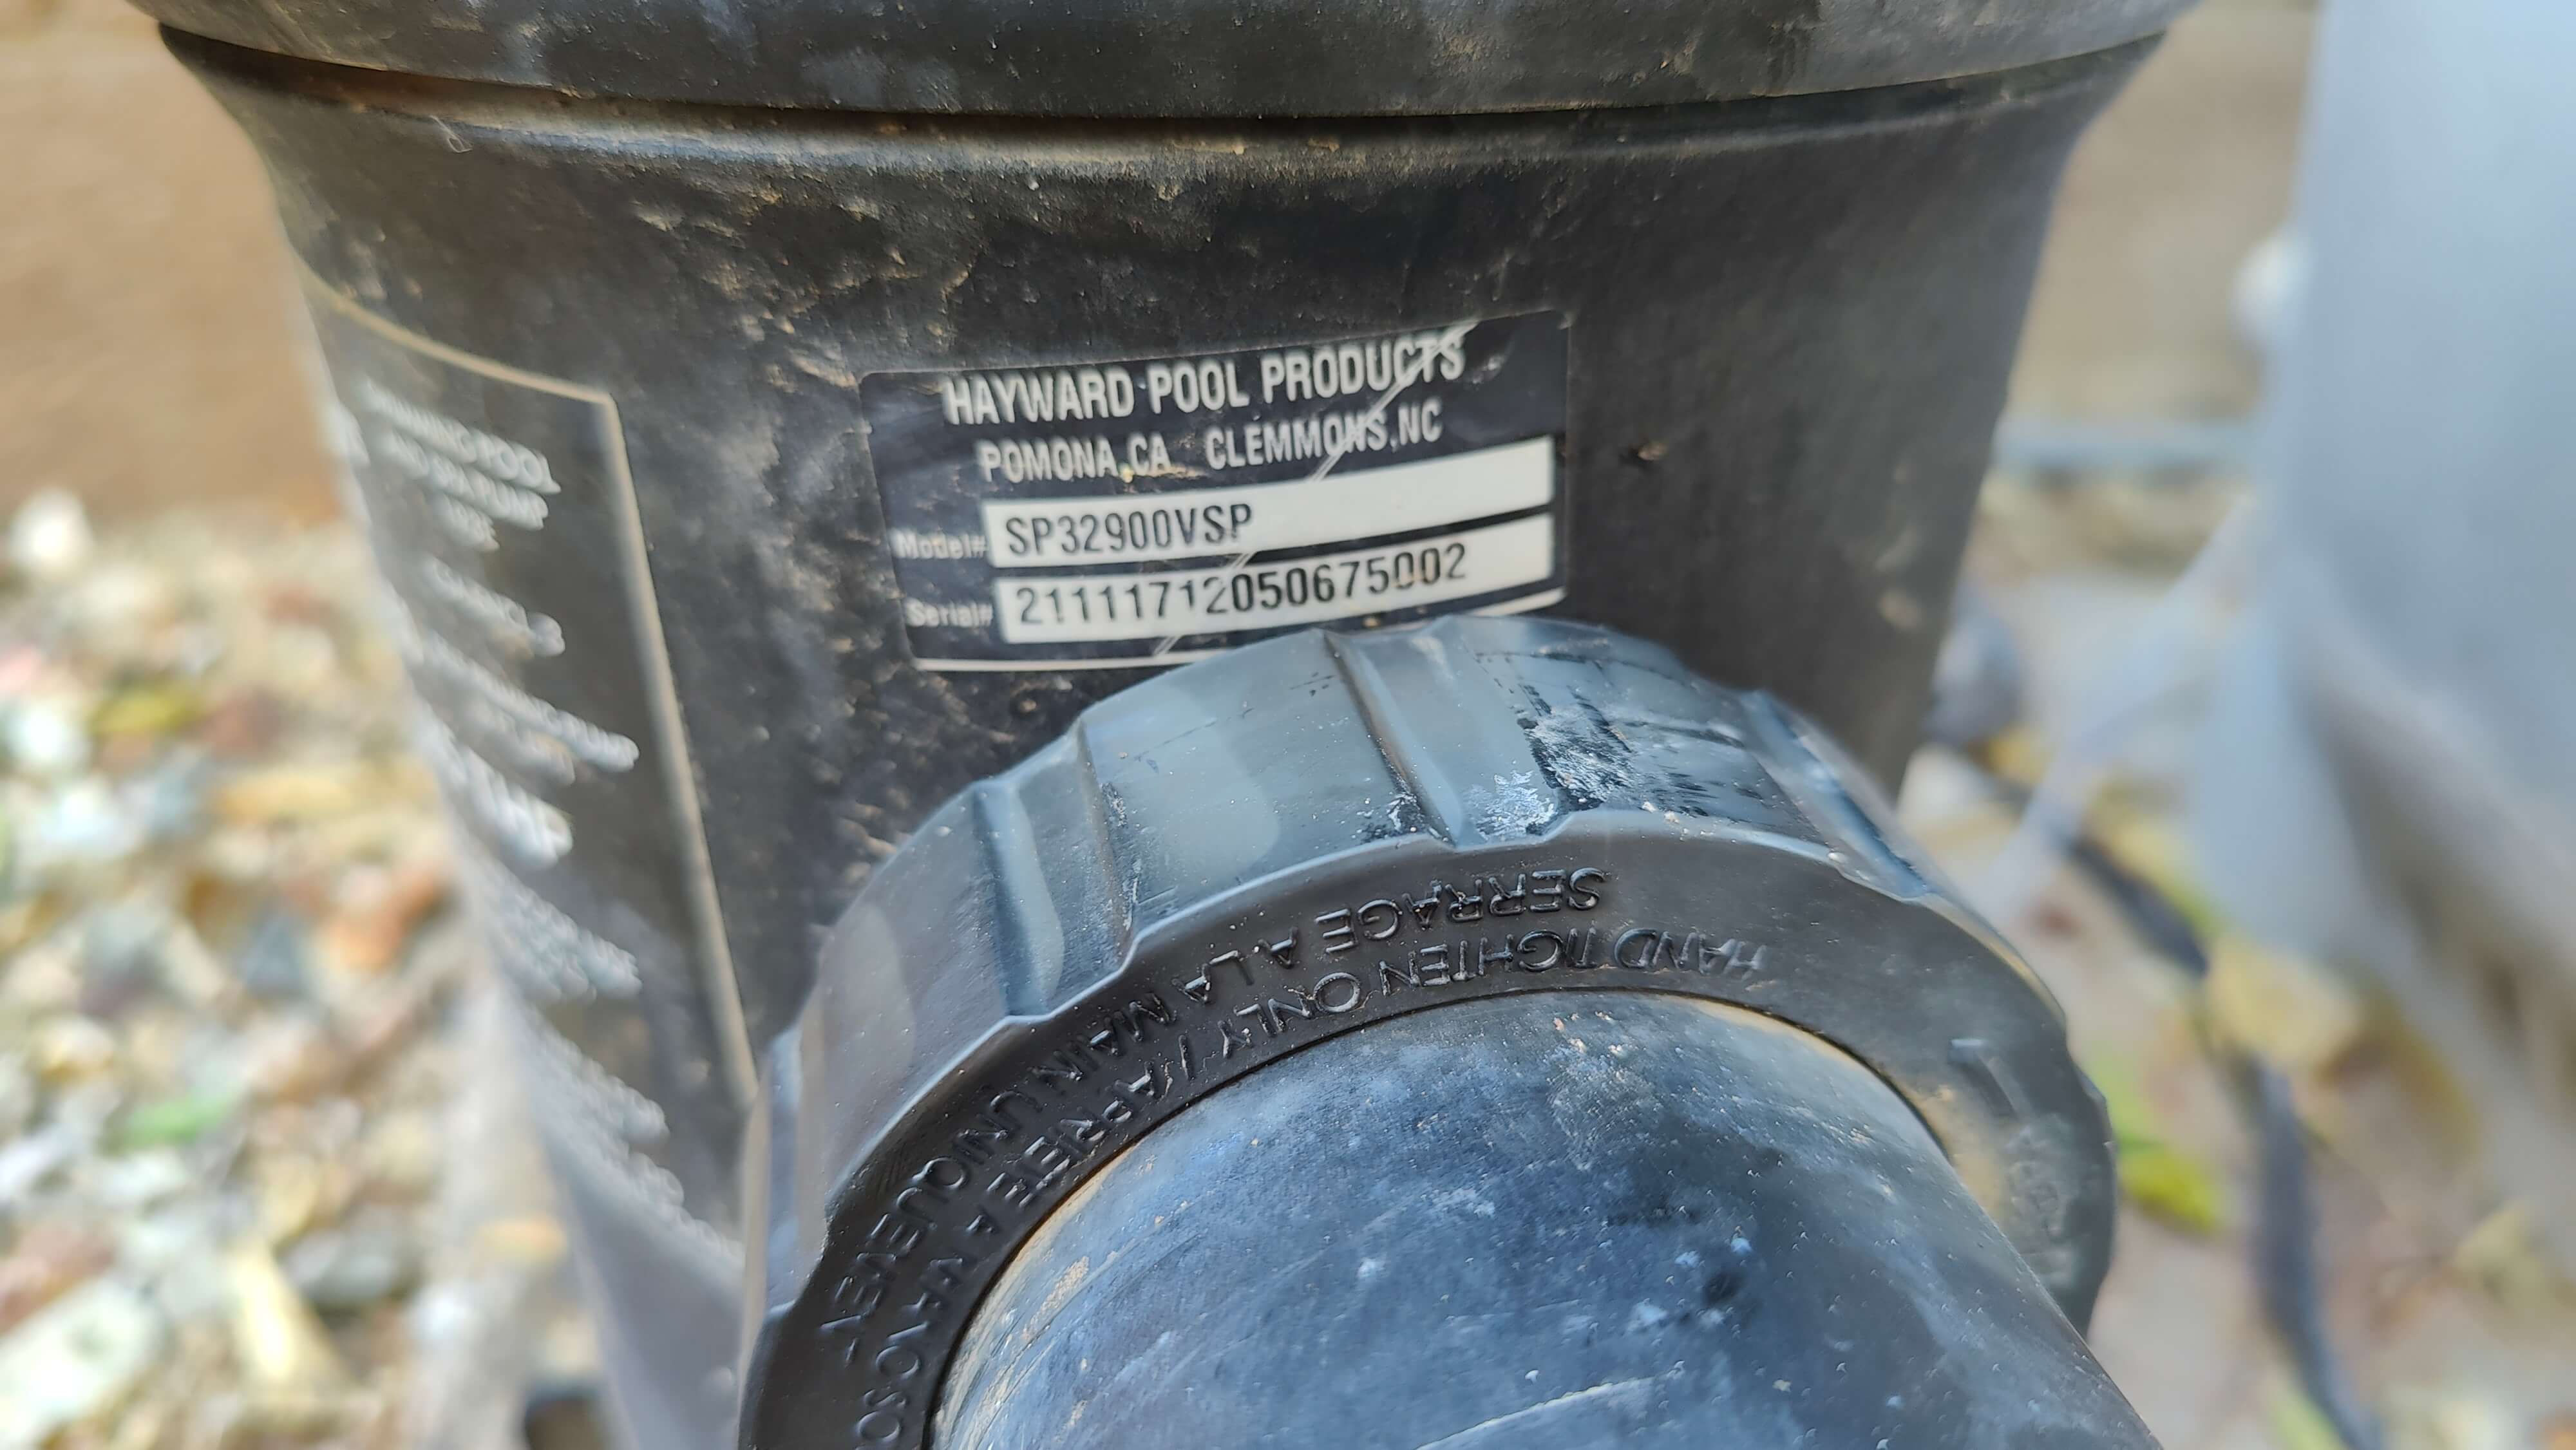 second label on pump housing